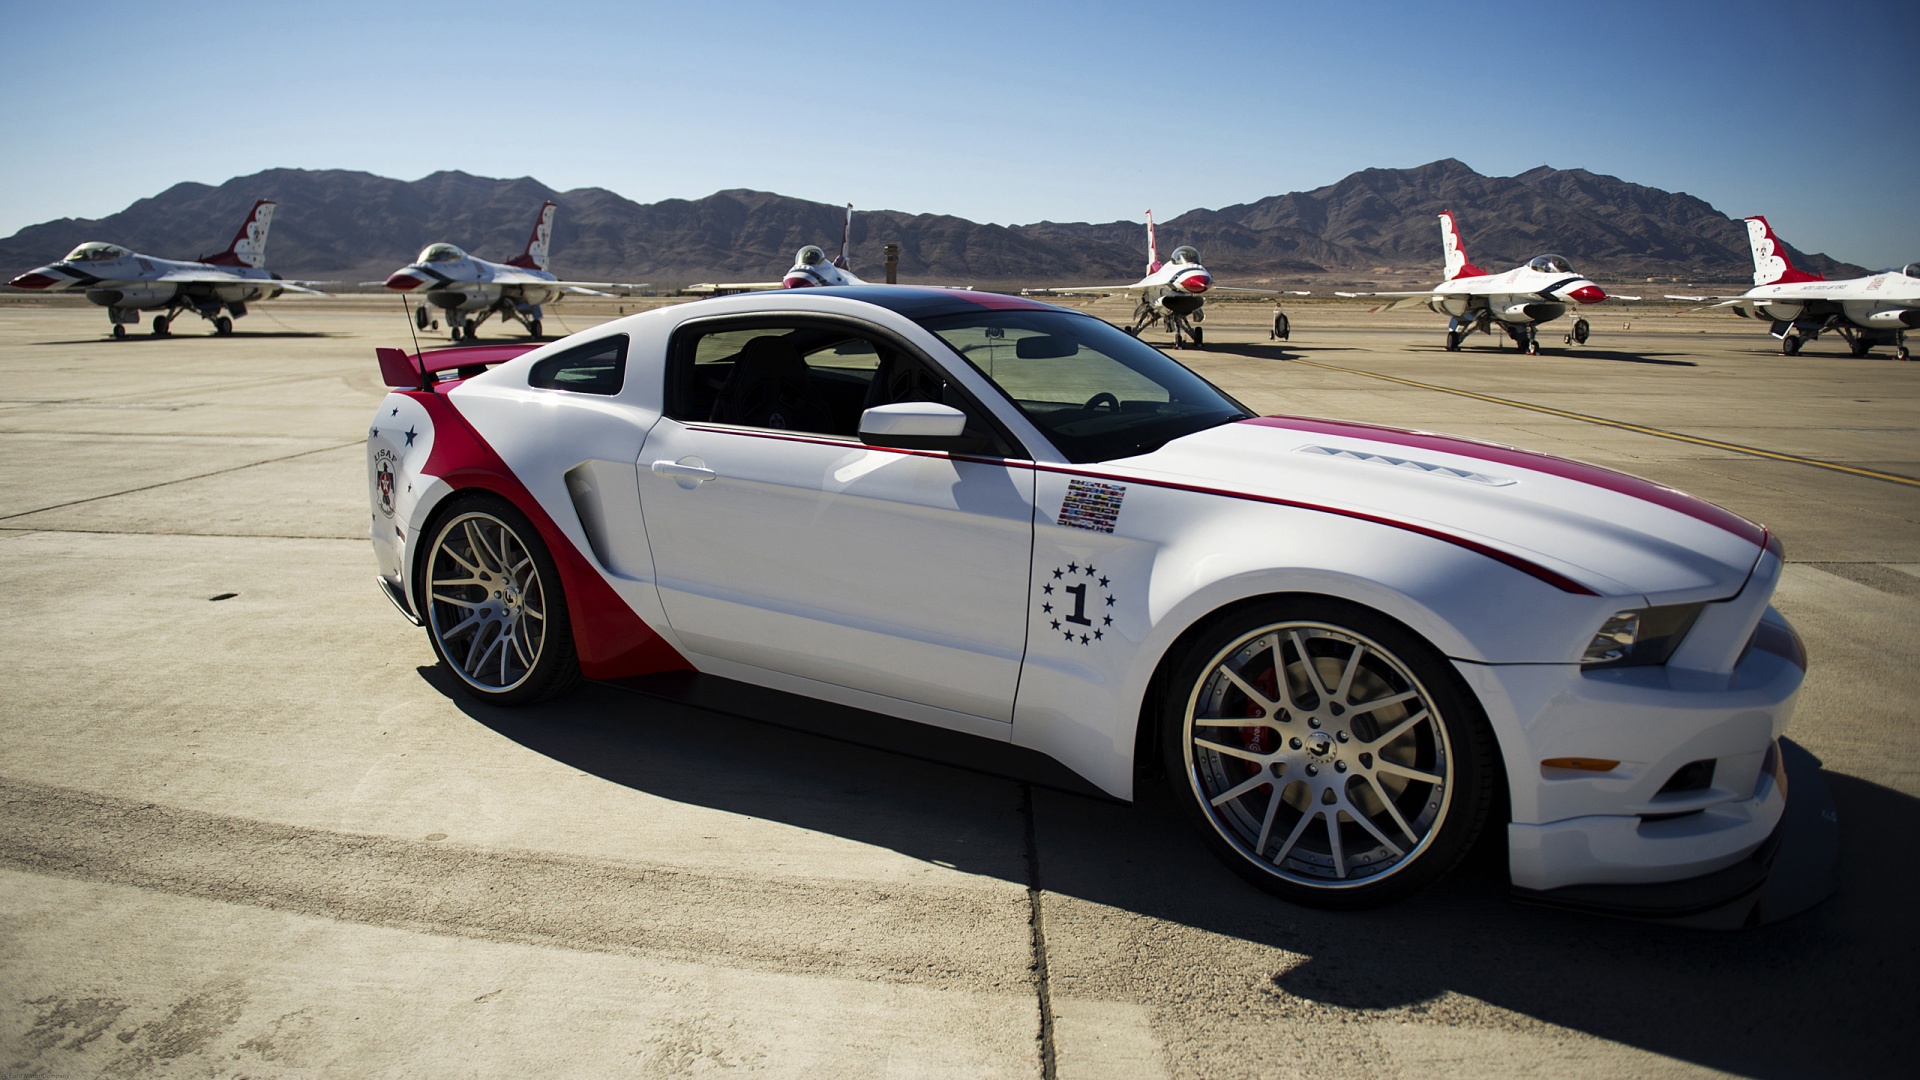 Ford Mustang Gt Us Air Force Thunderbirds Edition Wallpaper